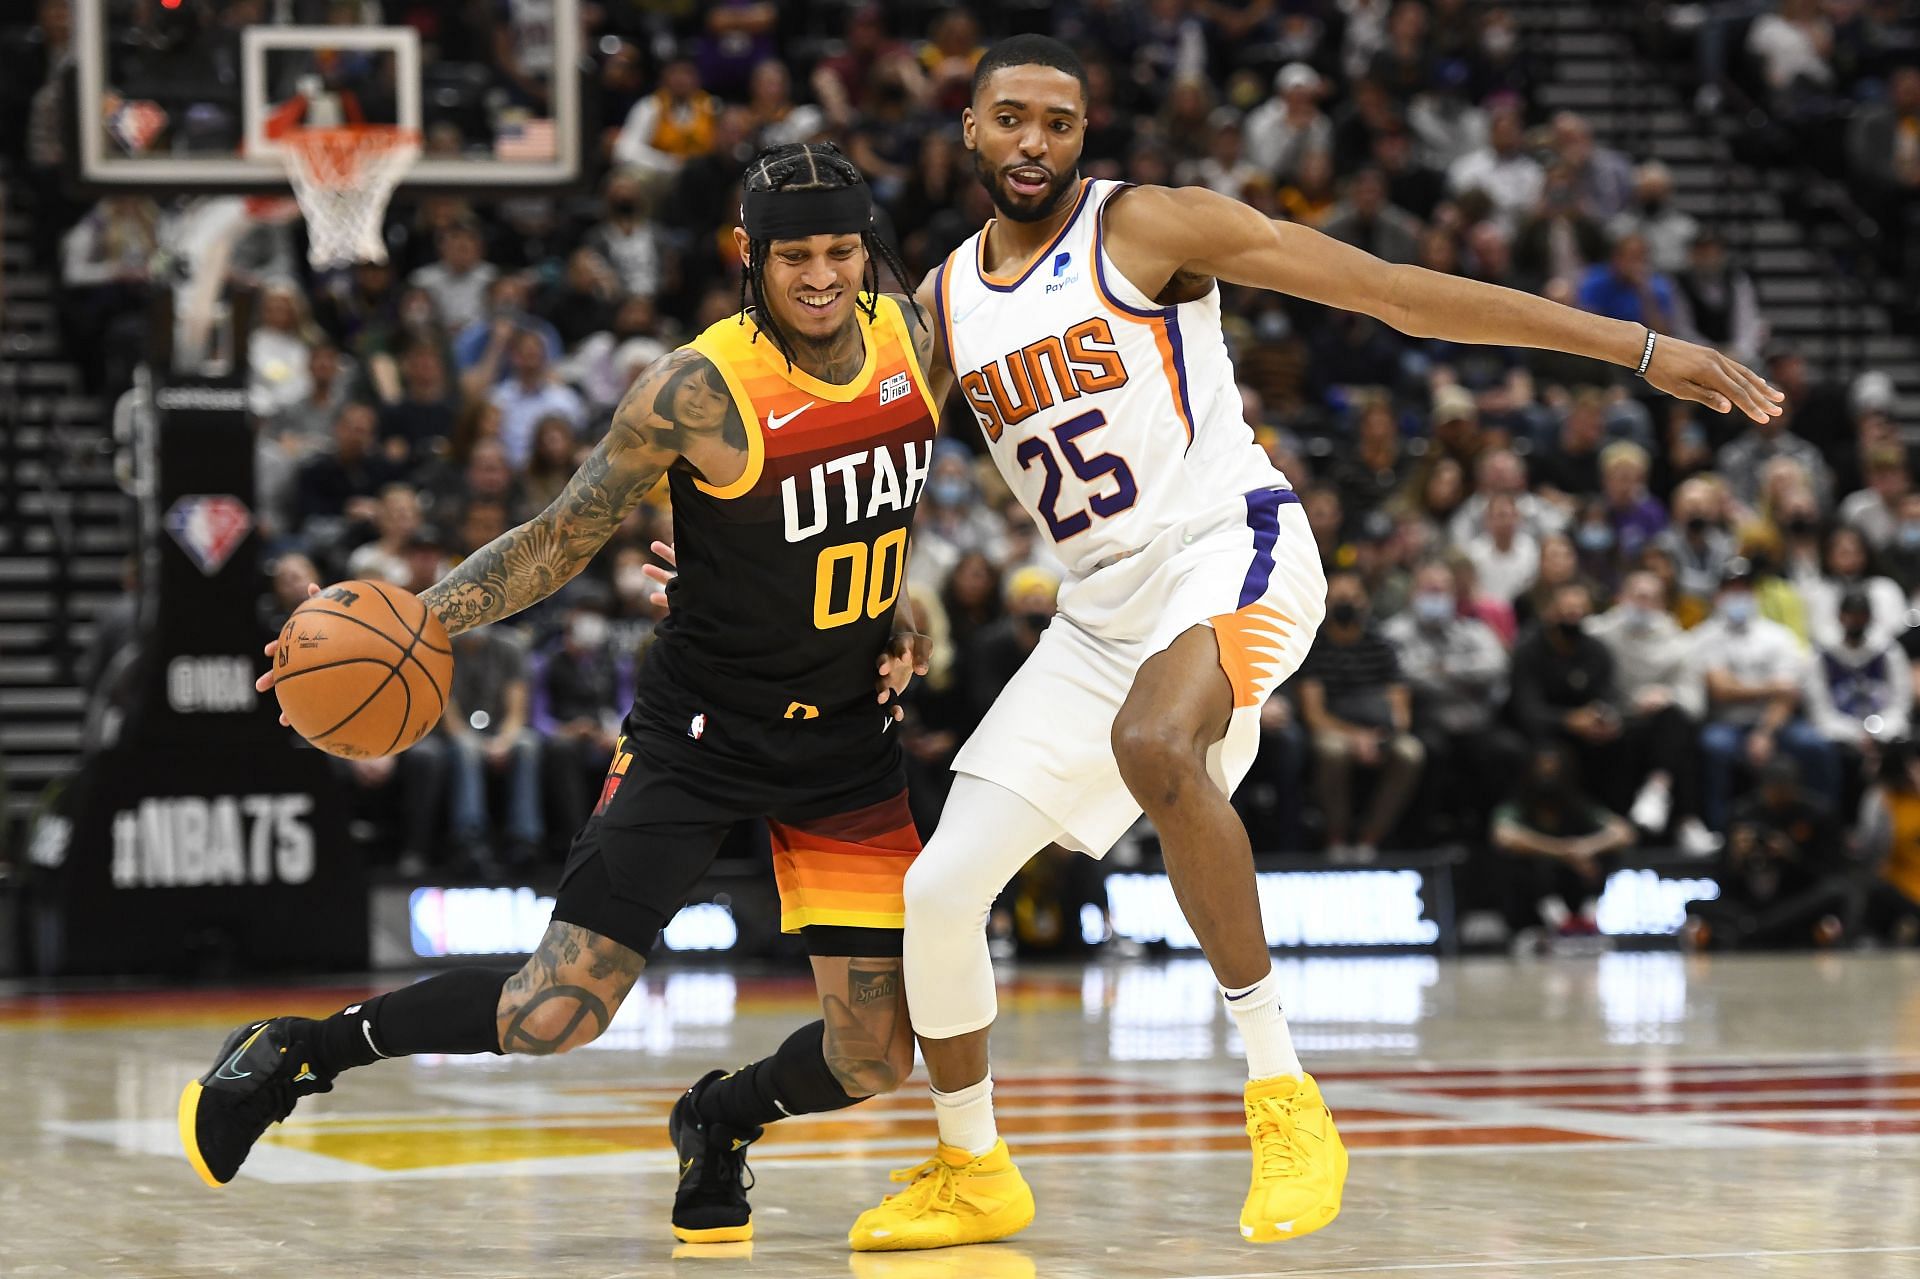 Phoenix Suns will lock horns with the Utah Jazz at the Vivint Arena on Friday, April 8